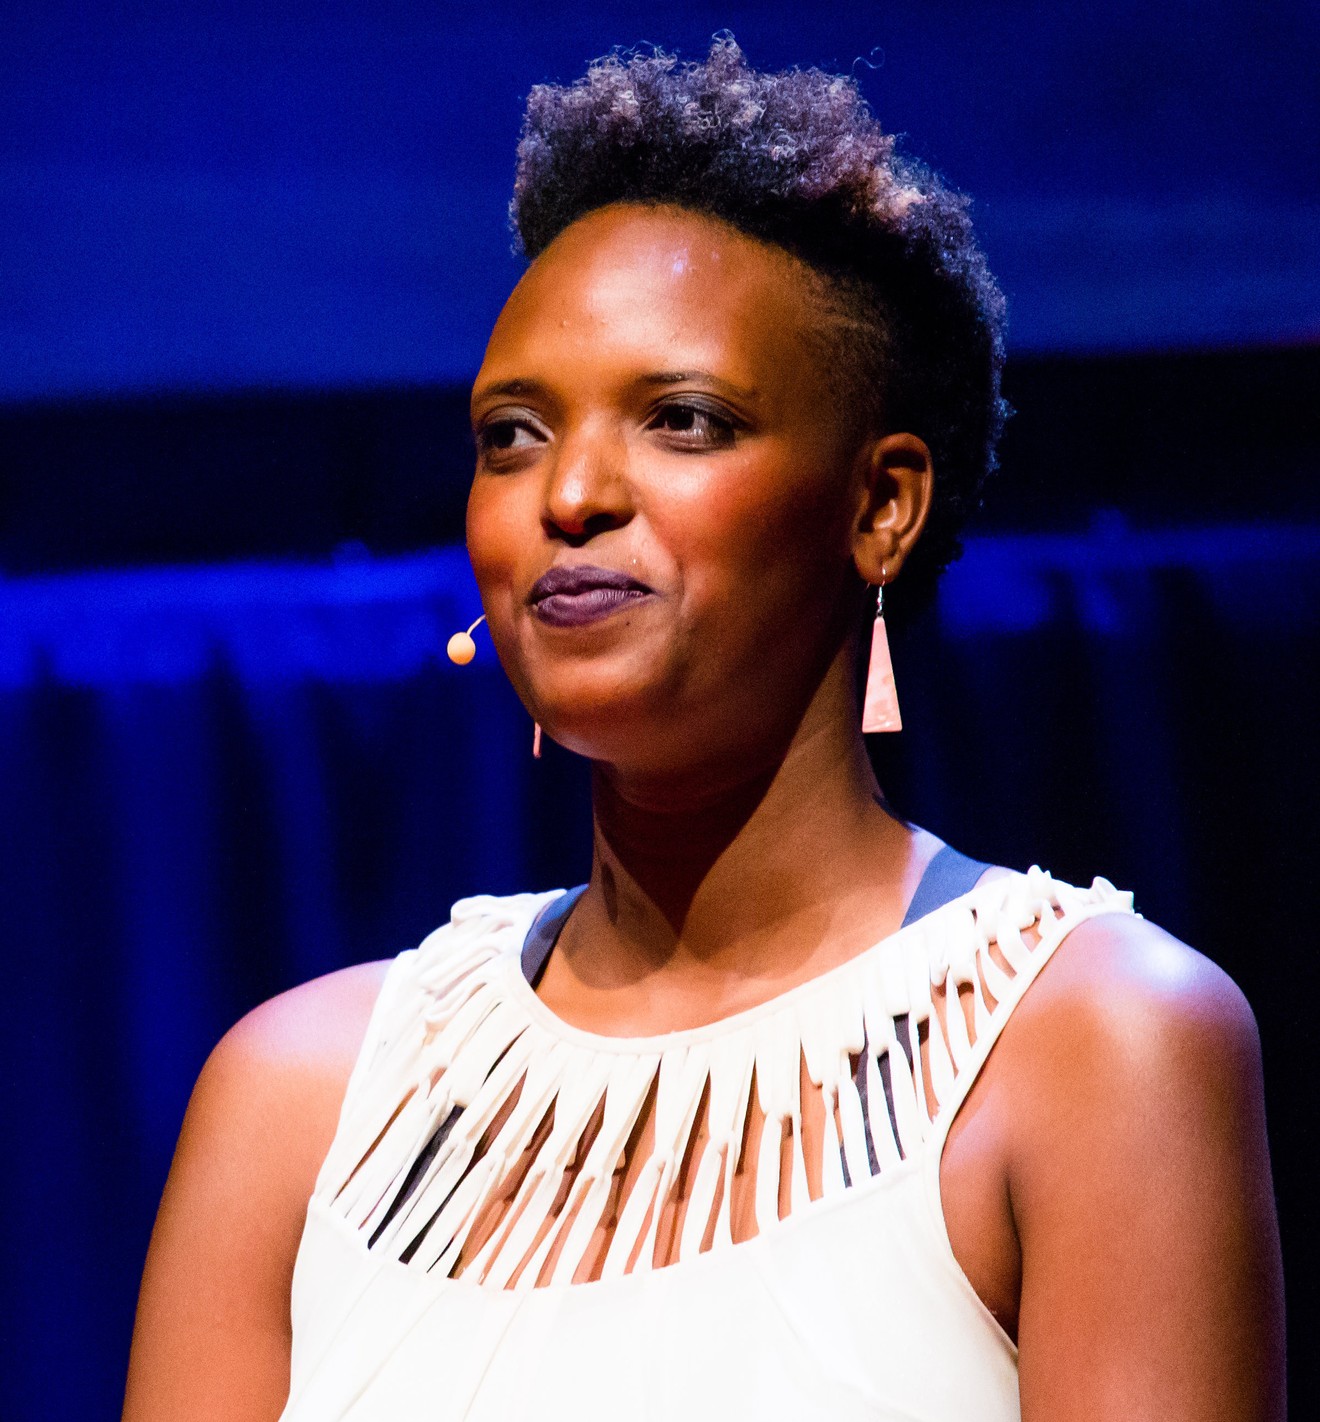 Assetou Xango performs for TedxMileHighWomen "It's About Time"  at the Buell Theater.